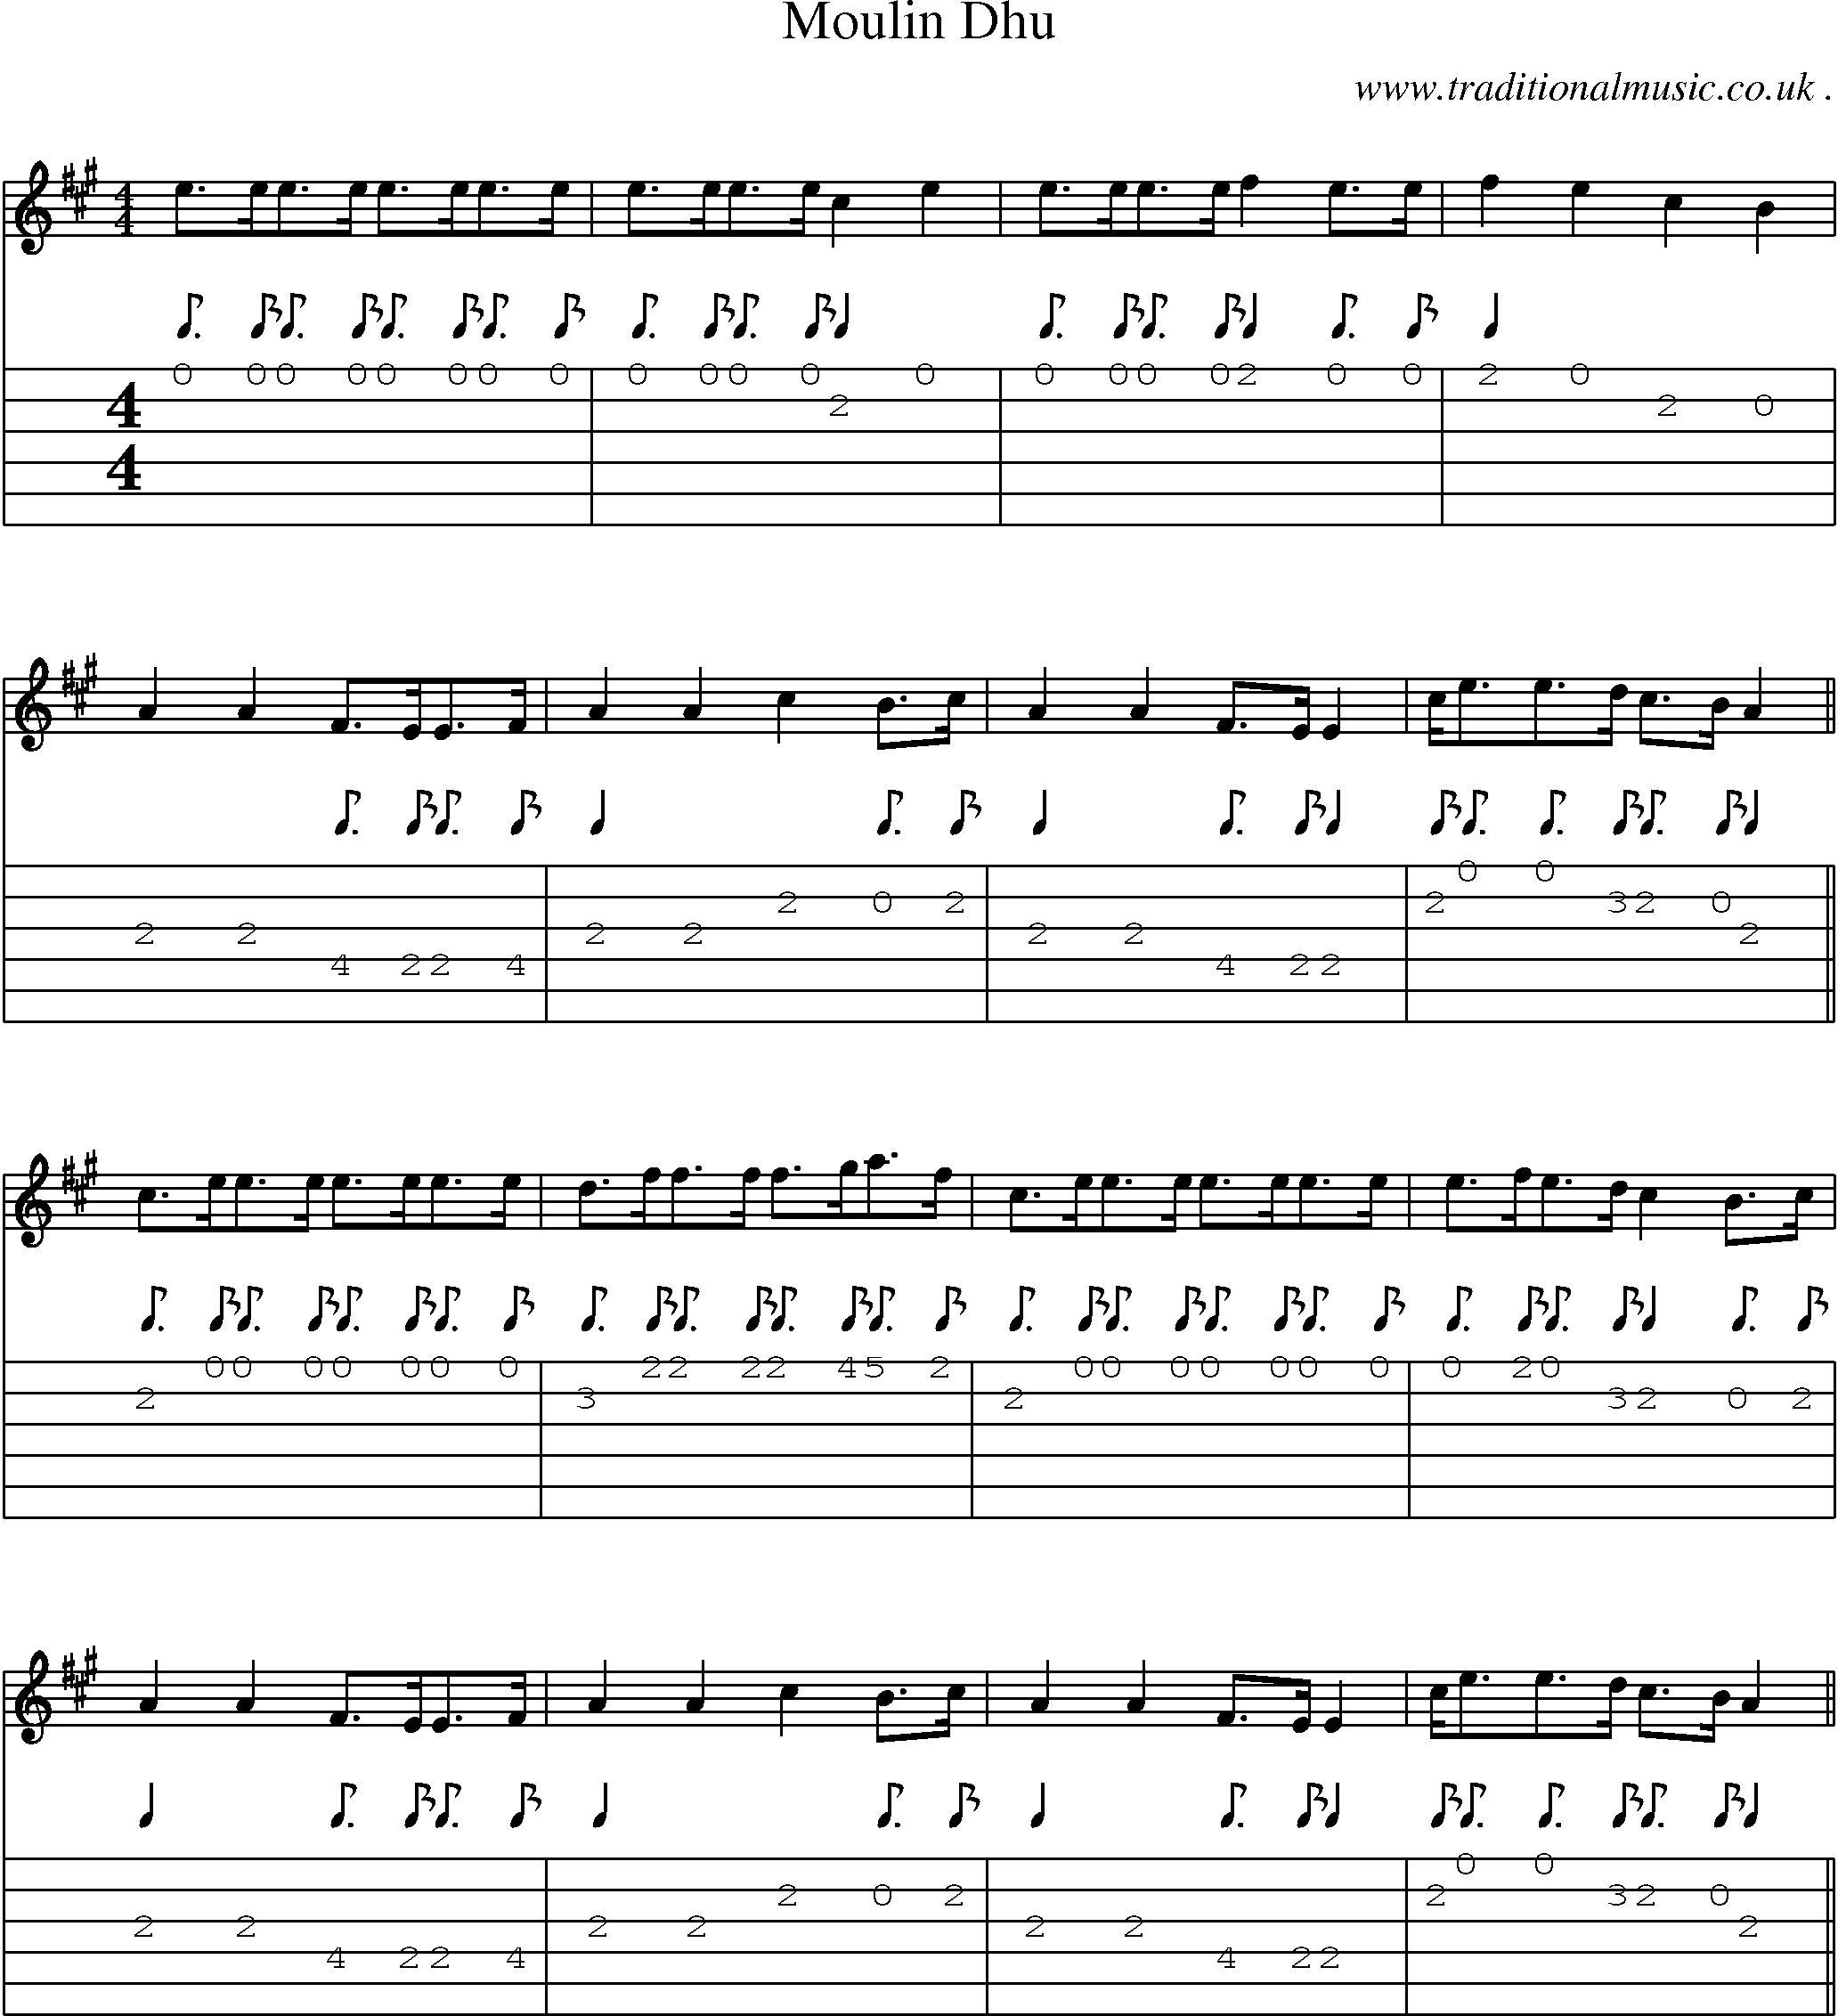 Sheet-Music and Guitar Tabs for Moulin Dhu